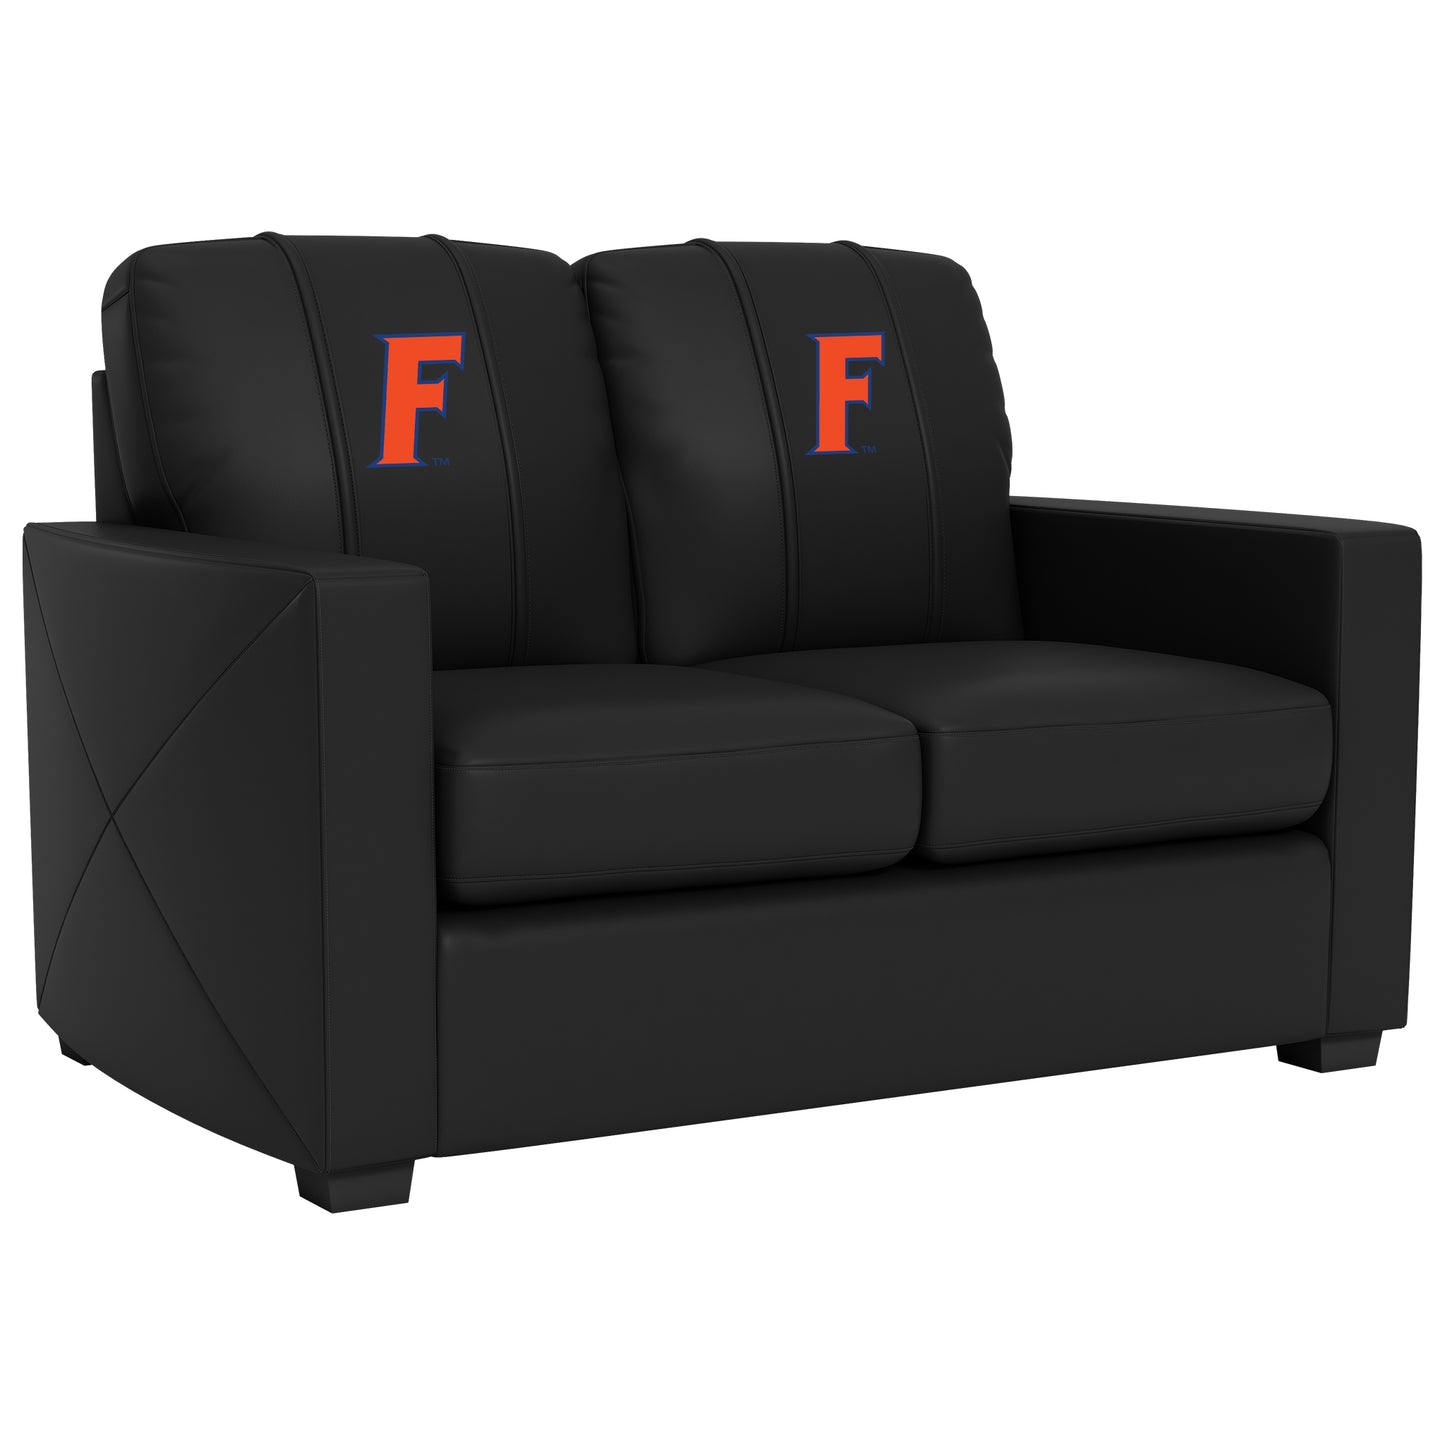 Silver Loveseat with Florida Gators Letter F Logo Panel